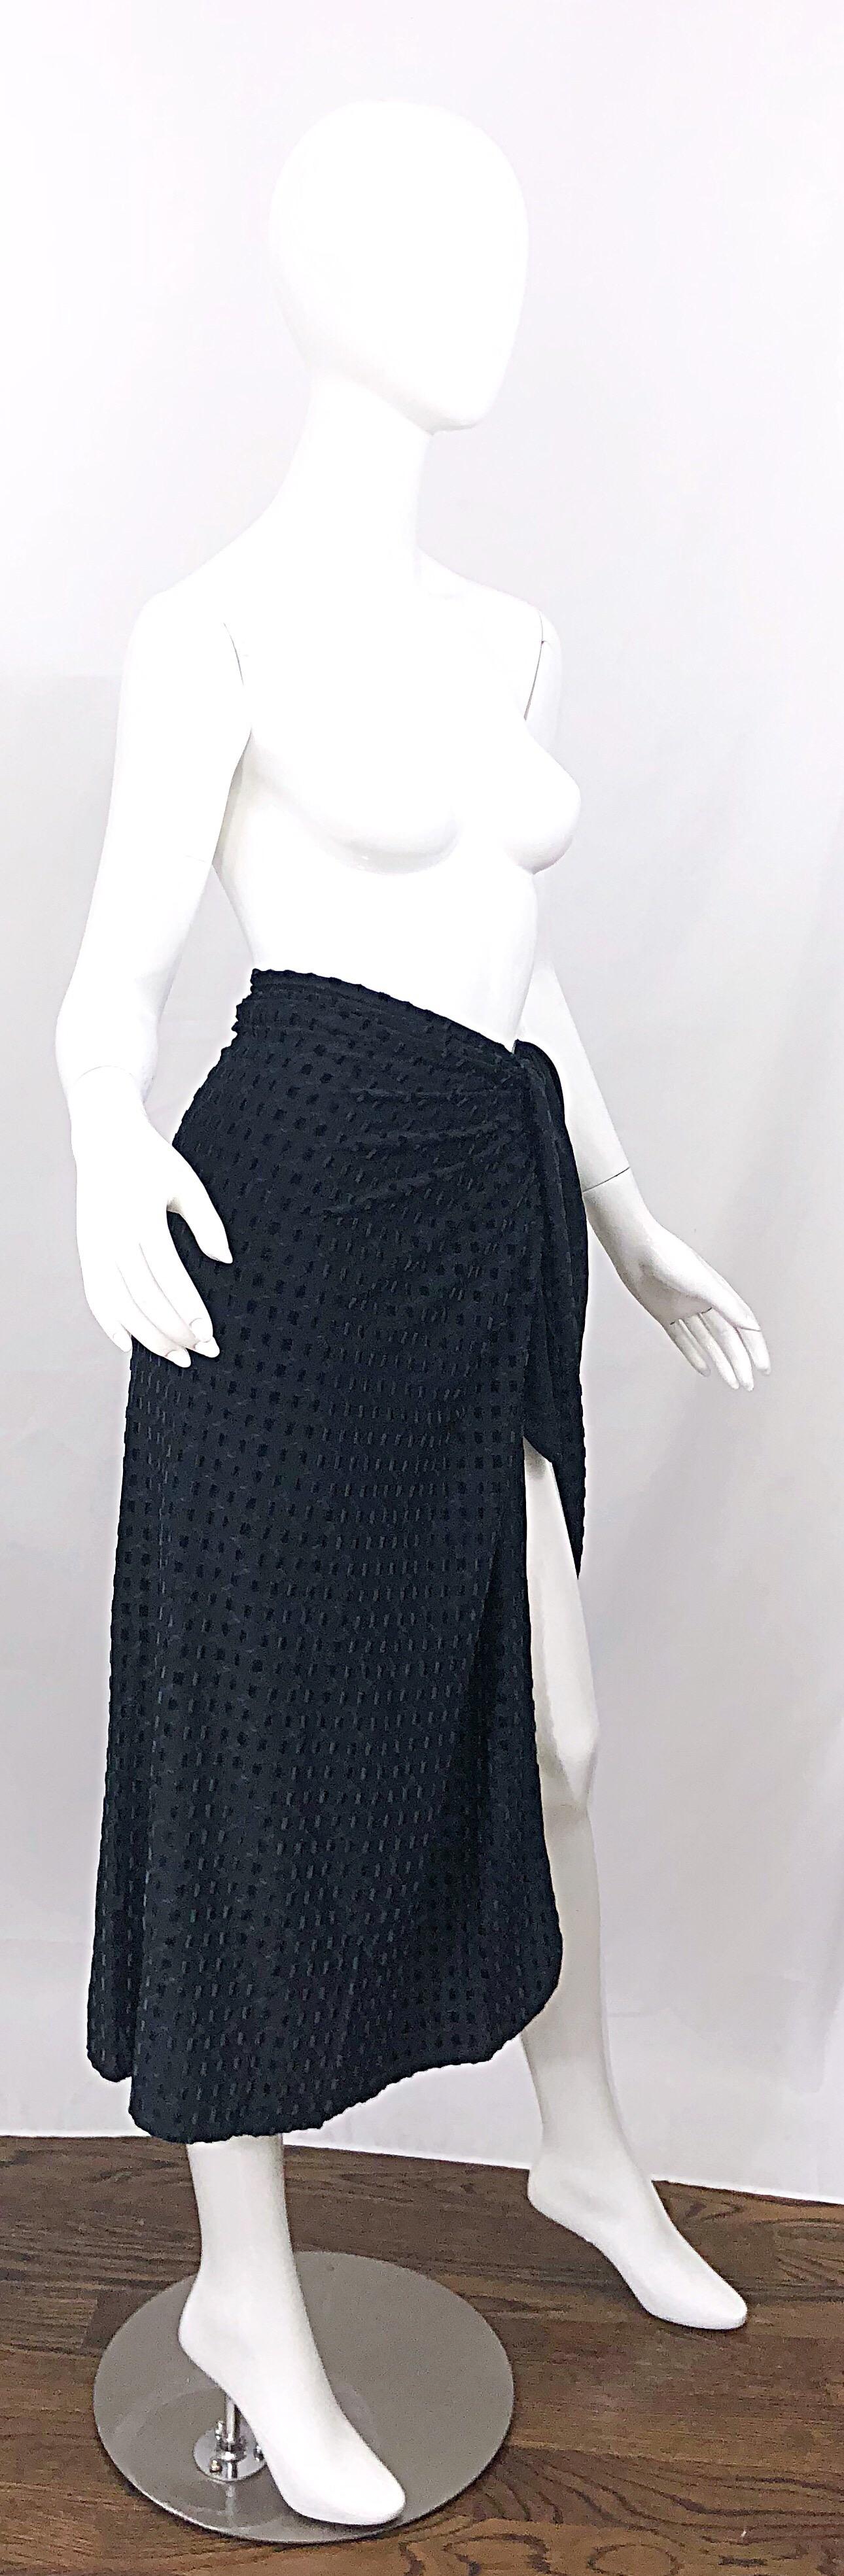 Women's Vintage Bill Blass Swimsuit Sarong 1990s Black and Hunter Green 90s Wrap Skirt For Sale